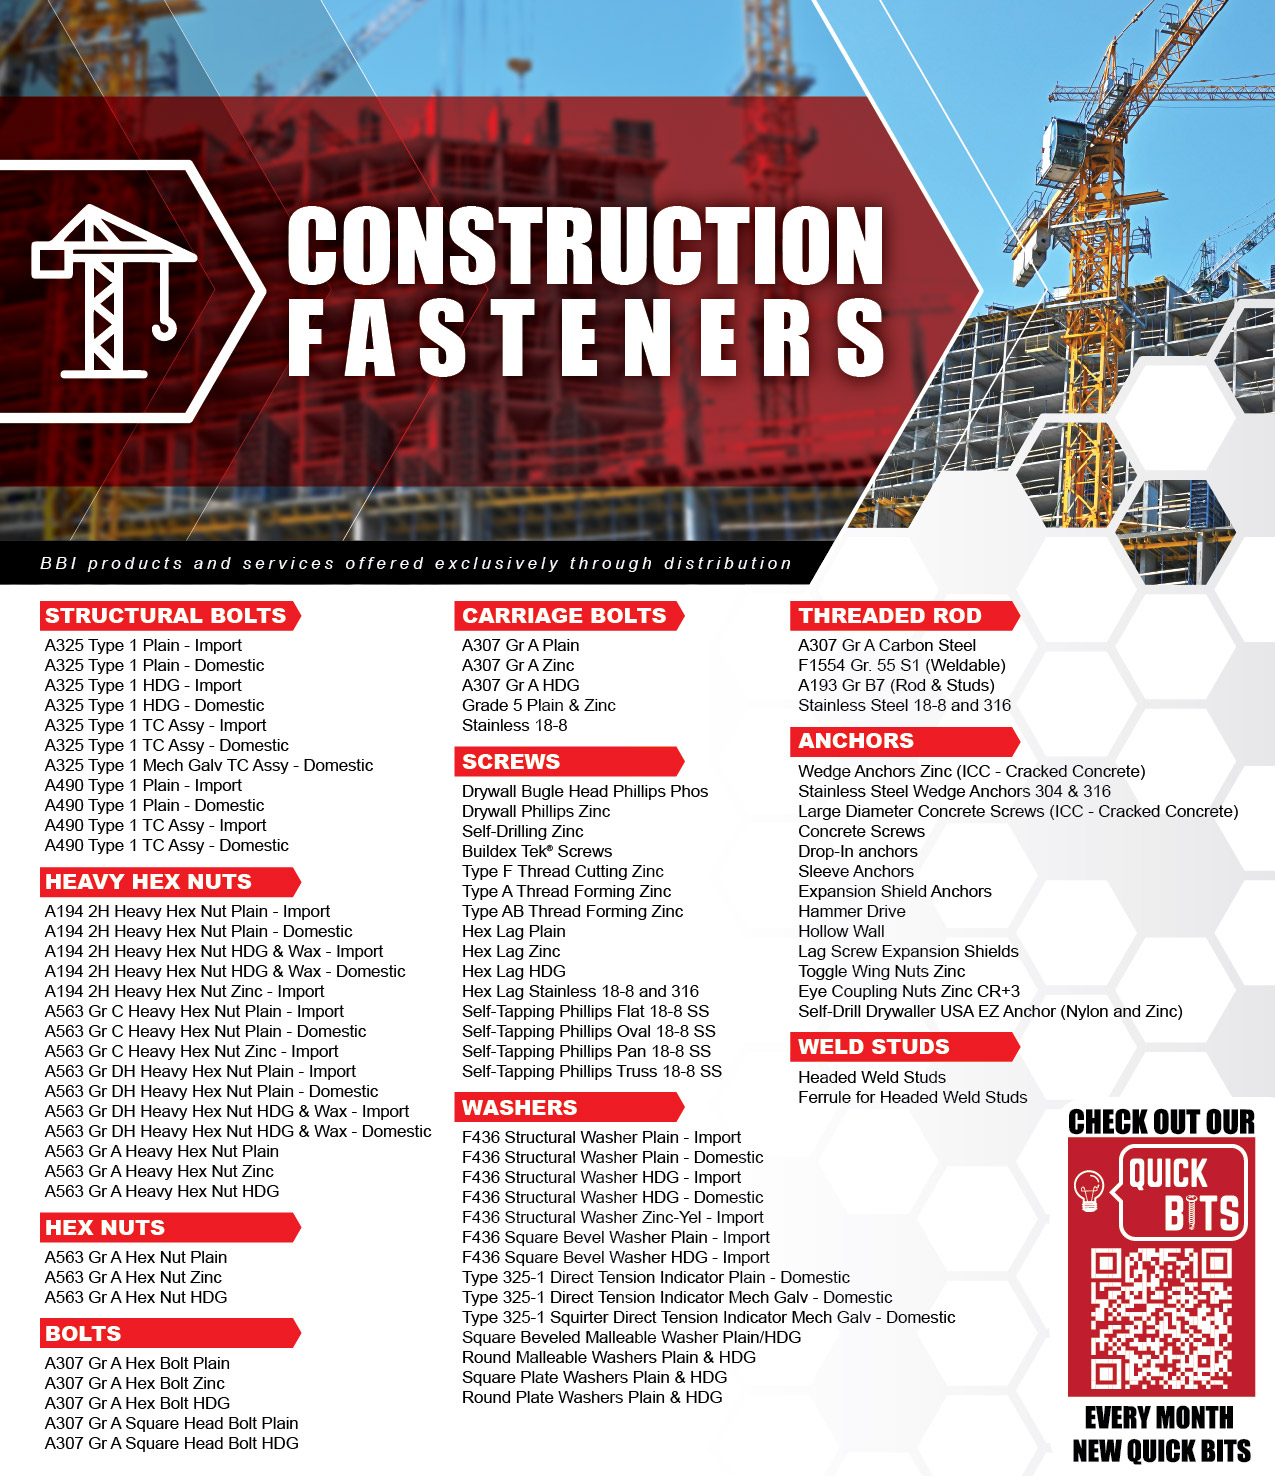 BBI - YOUR ONE STOP STAINLESS & NON-FERROUS FASTENERS SOURCE